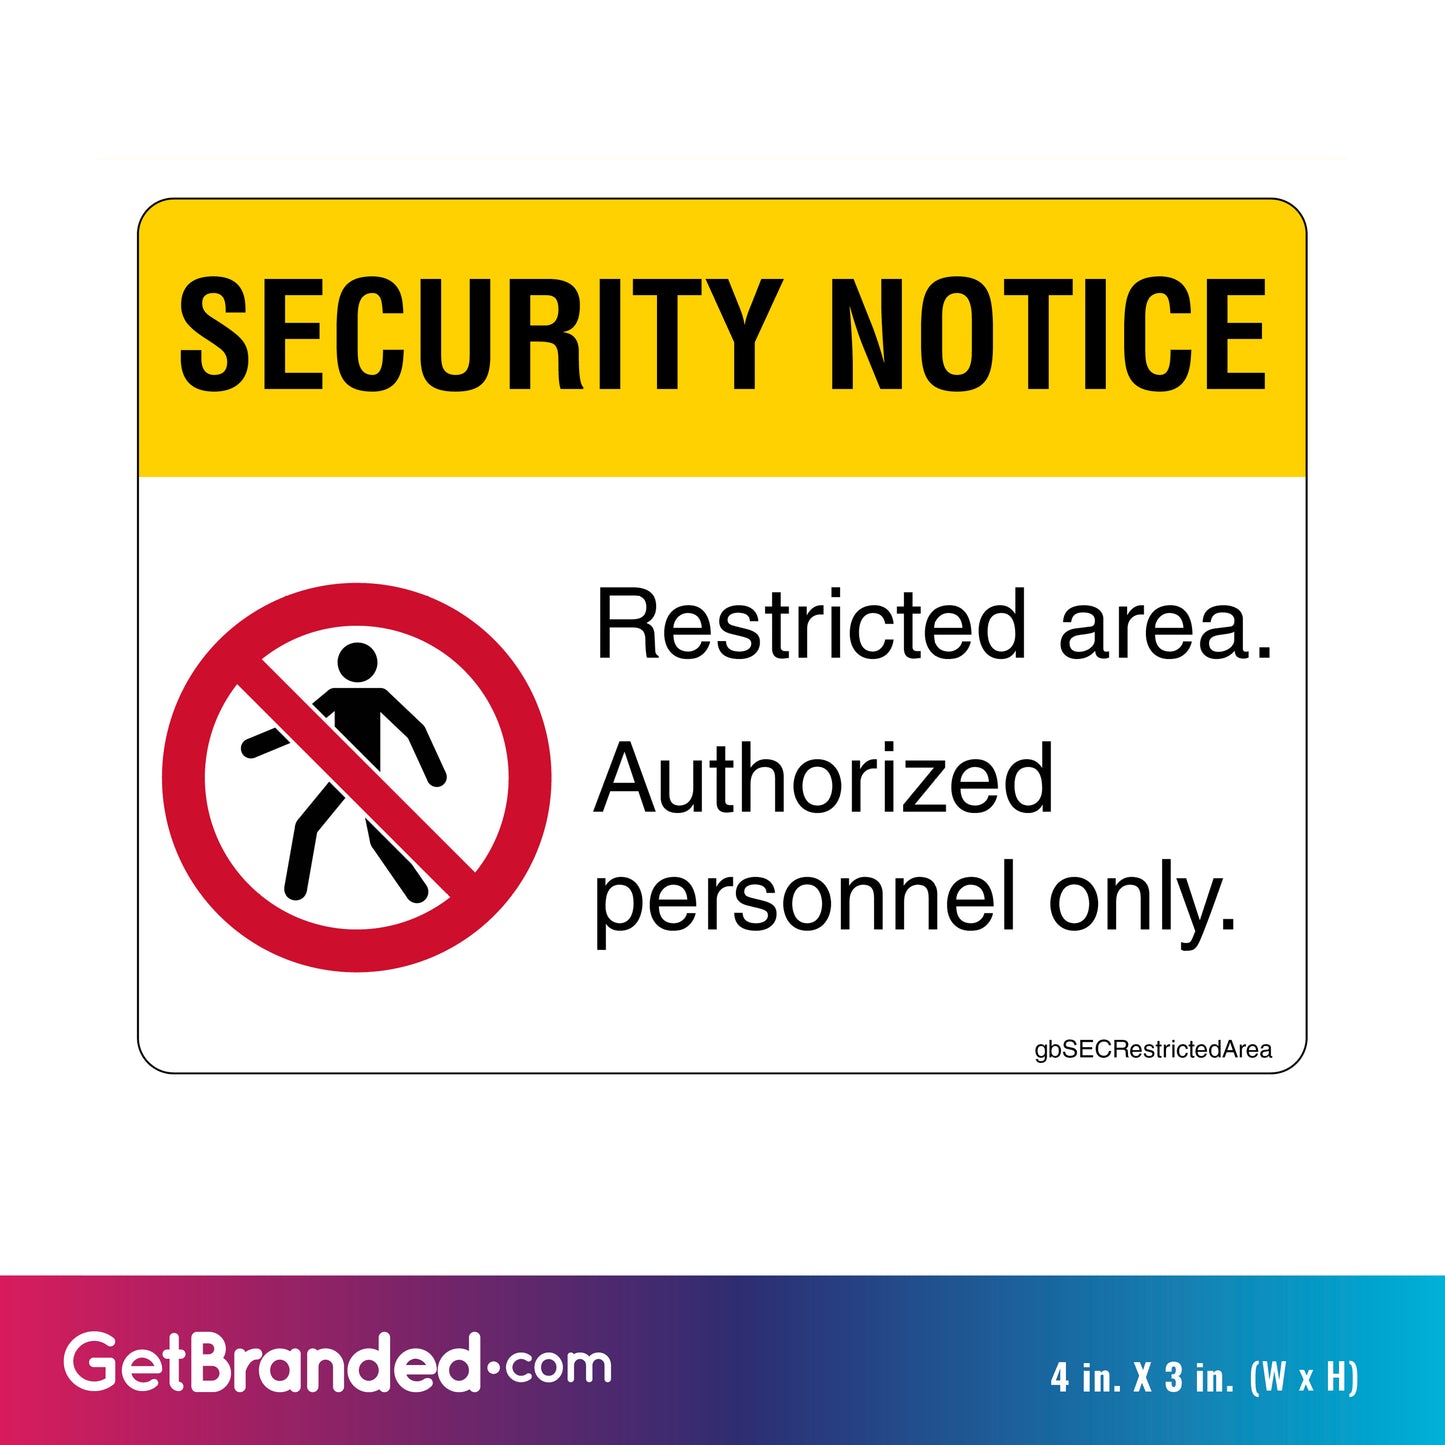 Security Notice Restricted Area Authorized Personnel Only Decal. 4 inches by 3 inches in size.